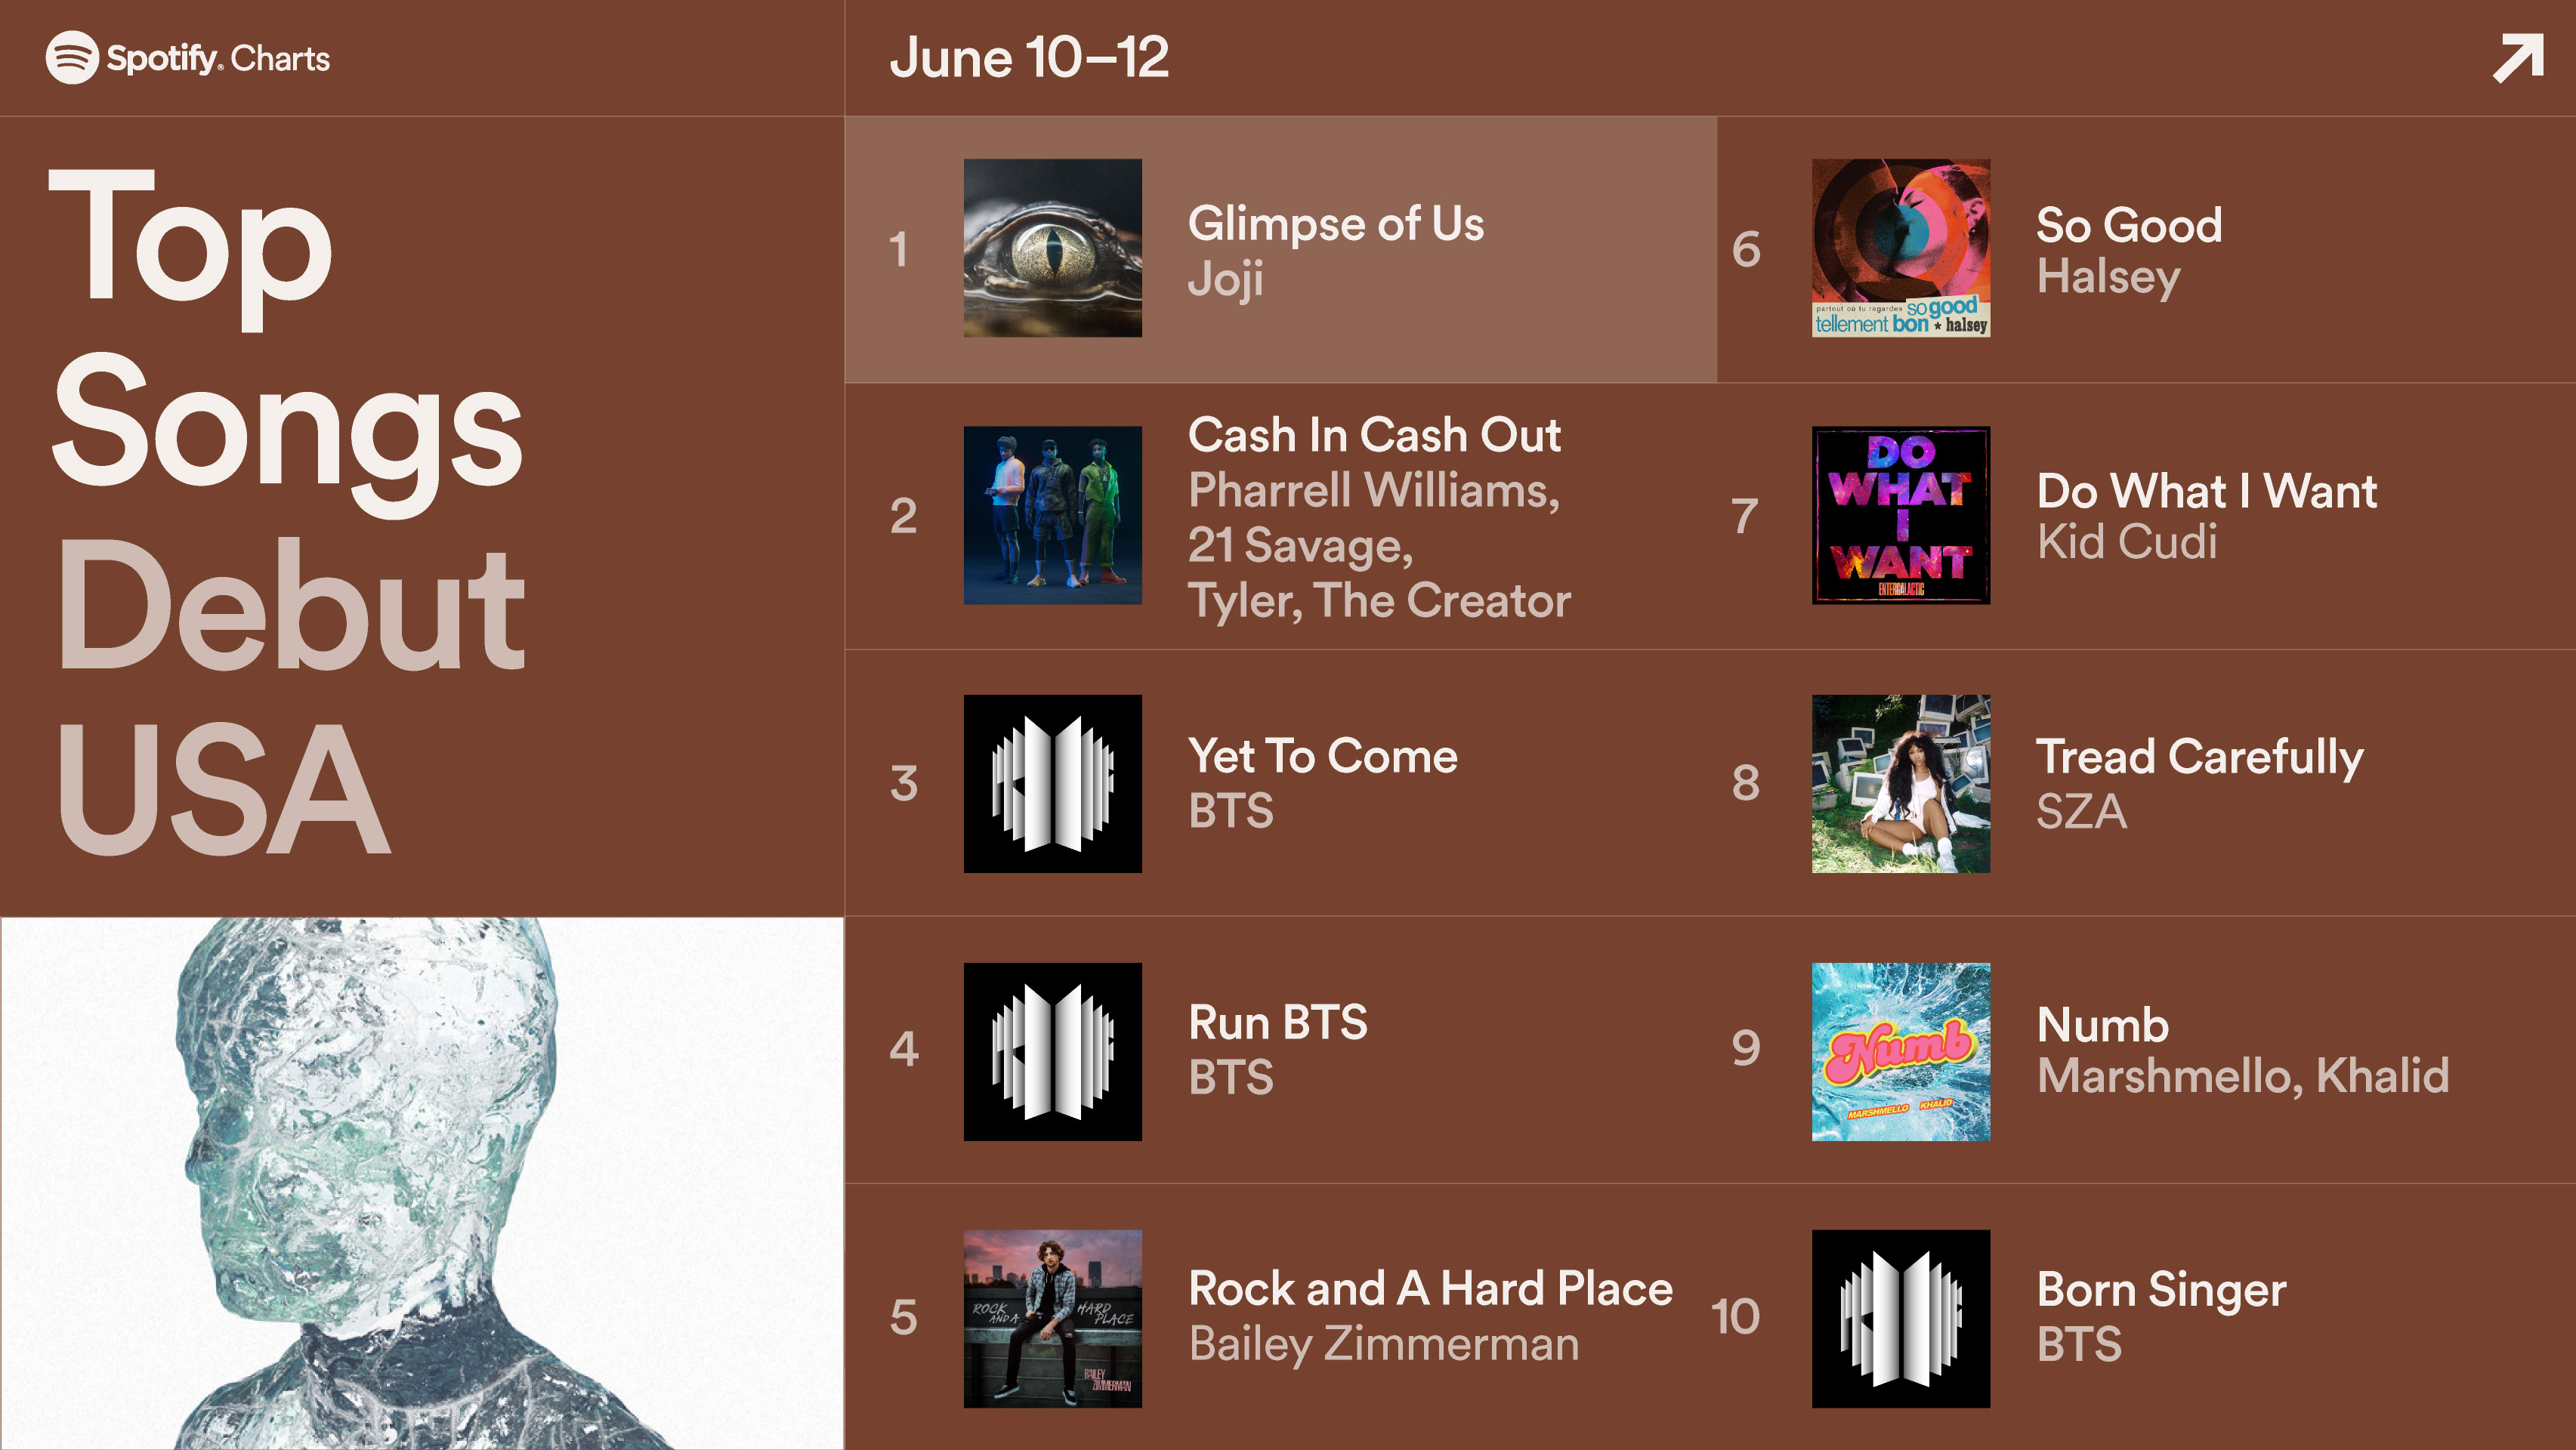 Spotify Charts on "#JOJI us in our feels with “Glimpse of Us” and debuts at #1 in the USA (June 10-12, 2022) https://t.co/h2FHn4N9uC" / Twitter